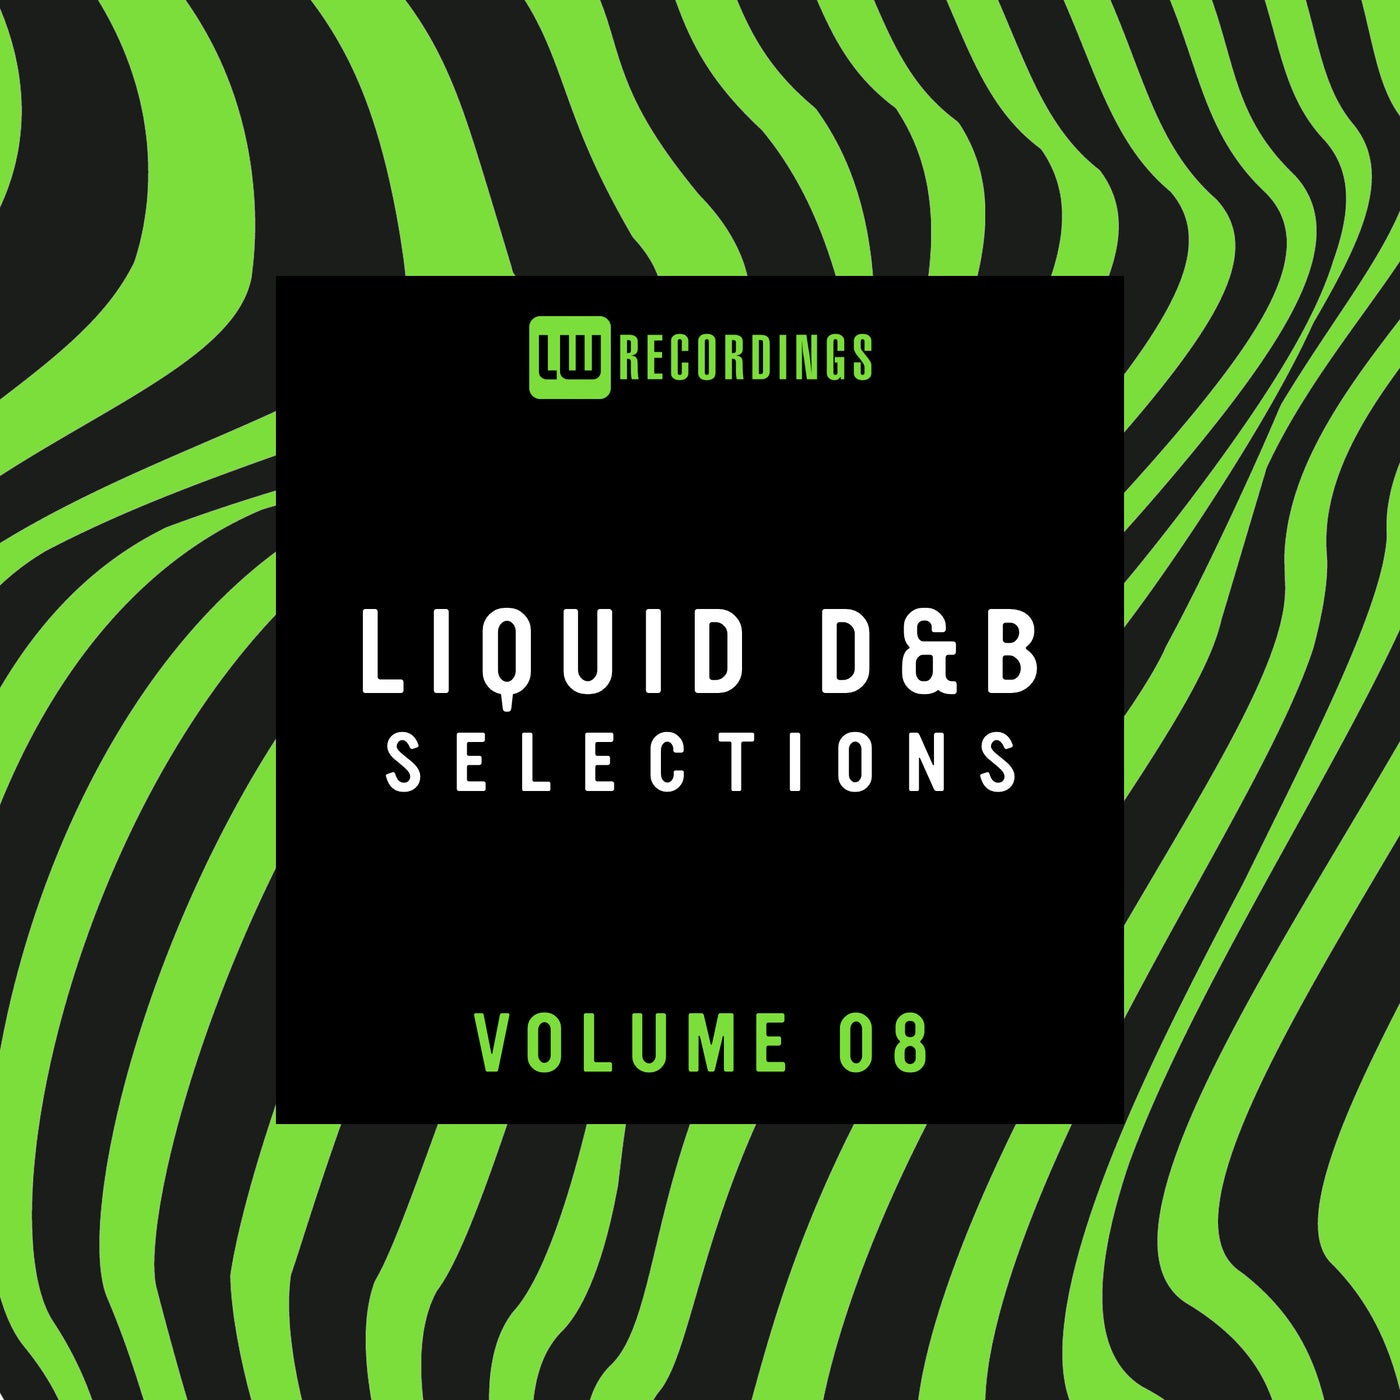 Beautiful Thieves, Chrizz0r - Liquid Drum & Bass Selections, Vol. 08 [LW Recordings]